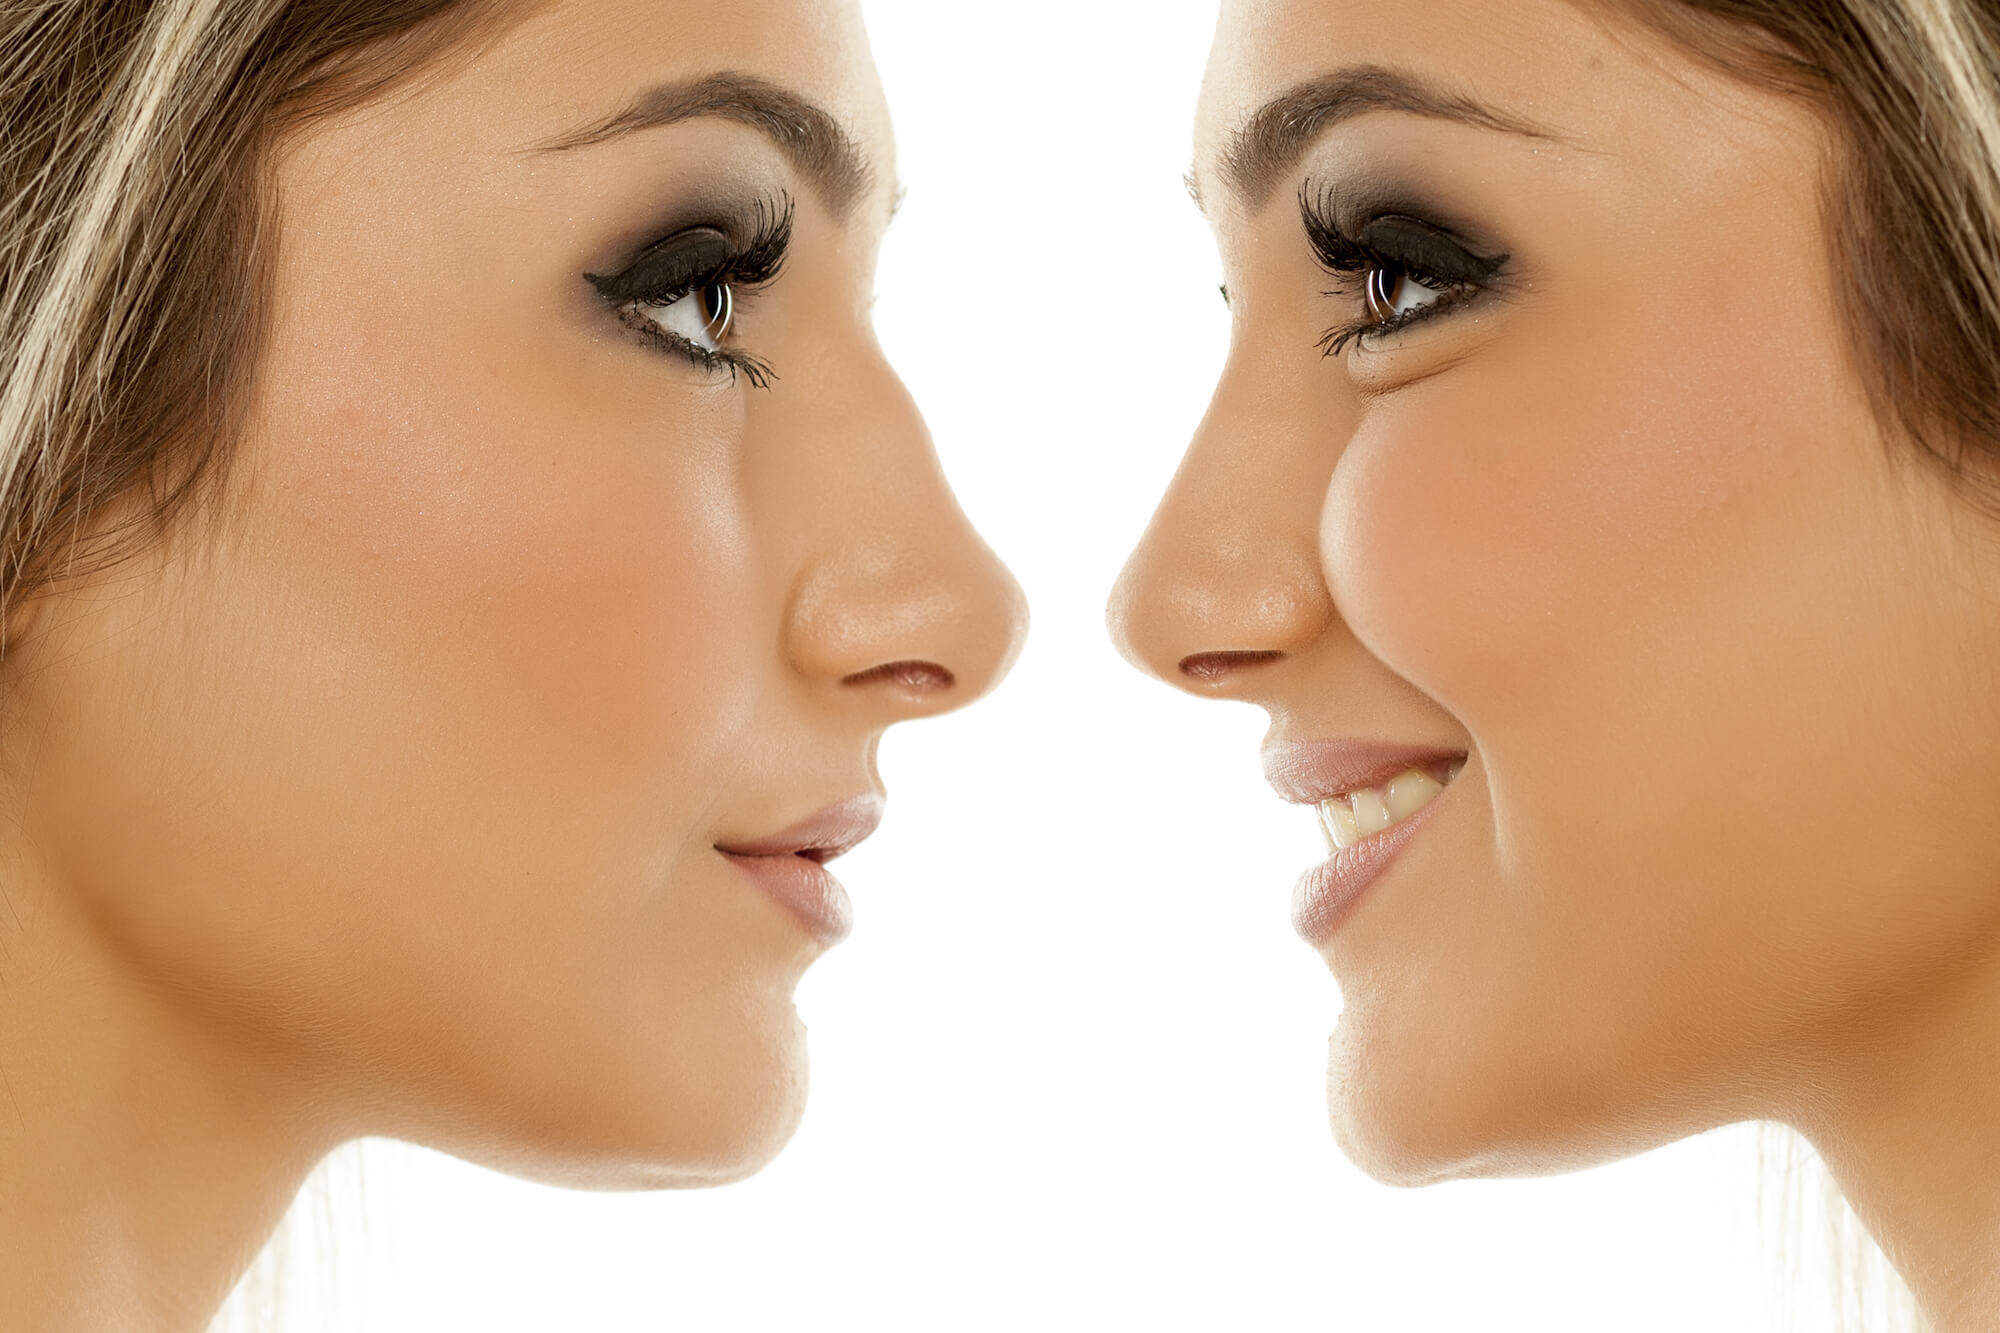 Close Up of Two Women Looking at Each Other - Left Side is Before Rhinoplasty and Right Side is After